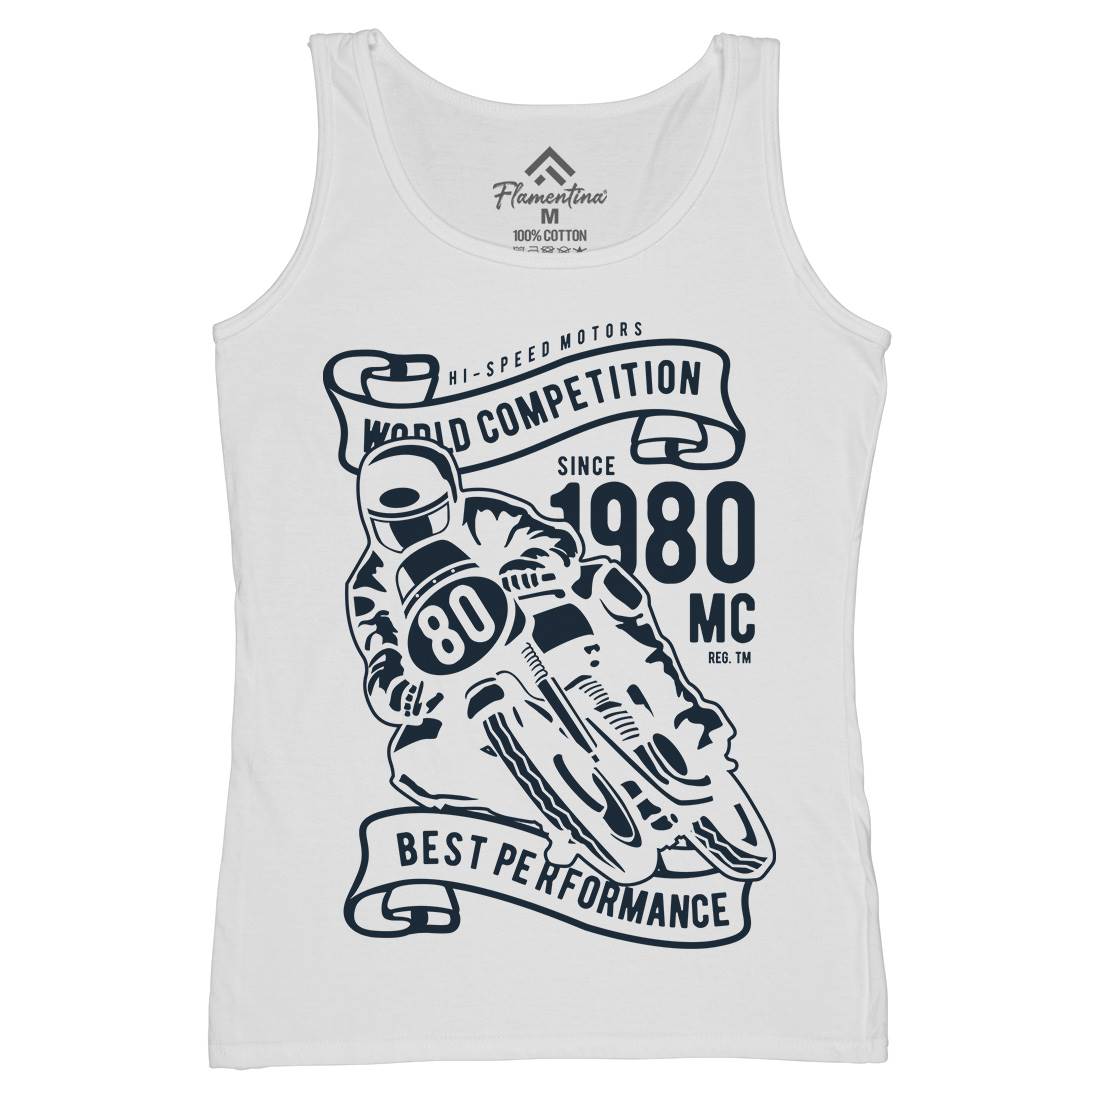 World Competition Superbike Womens Organic Tank Top Vest Motorcycles B477